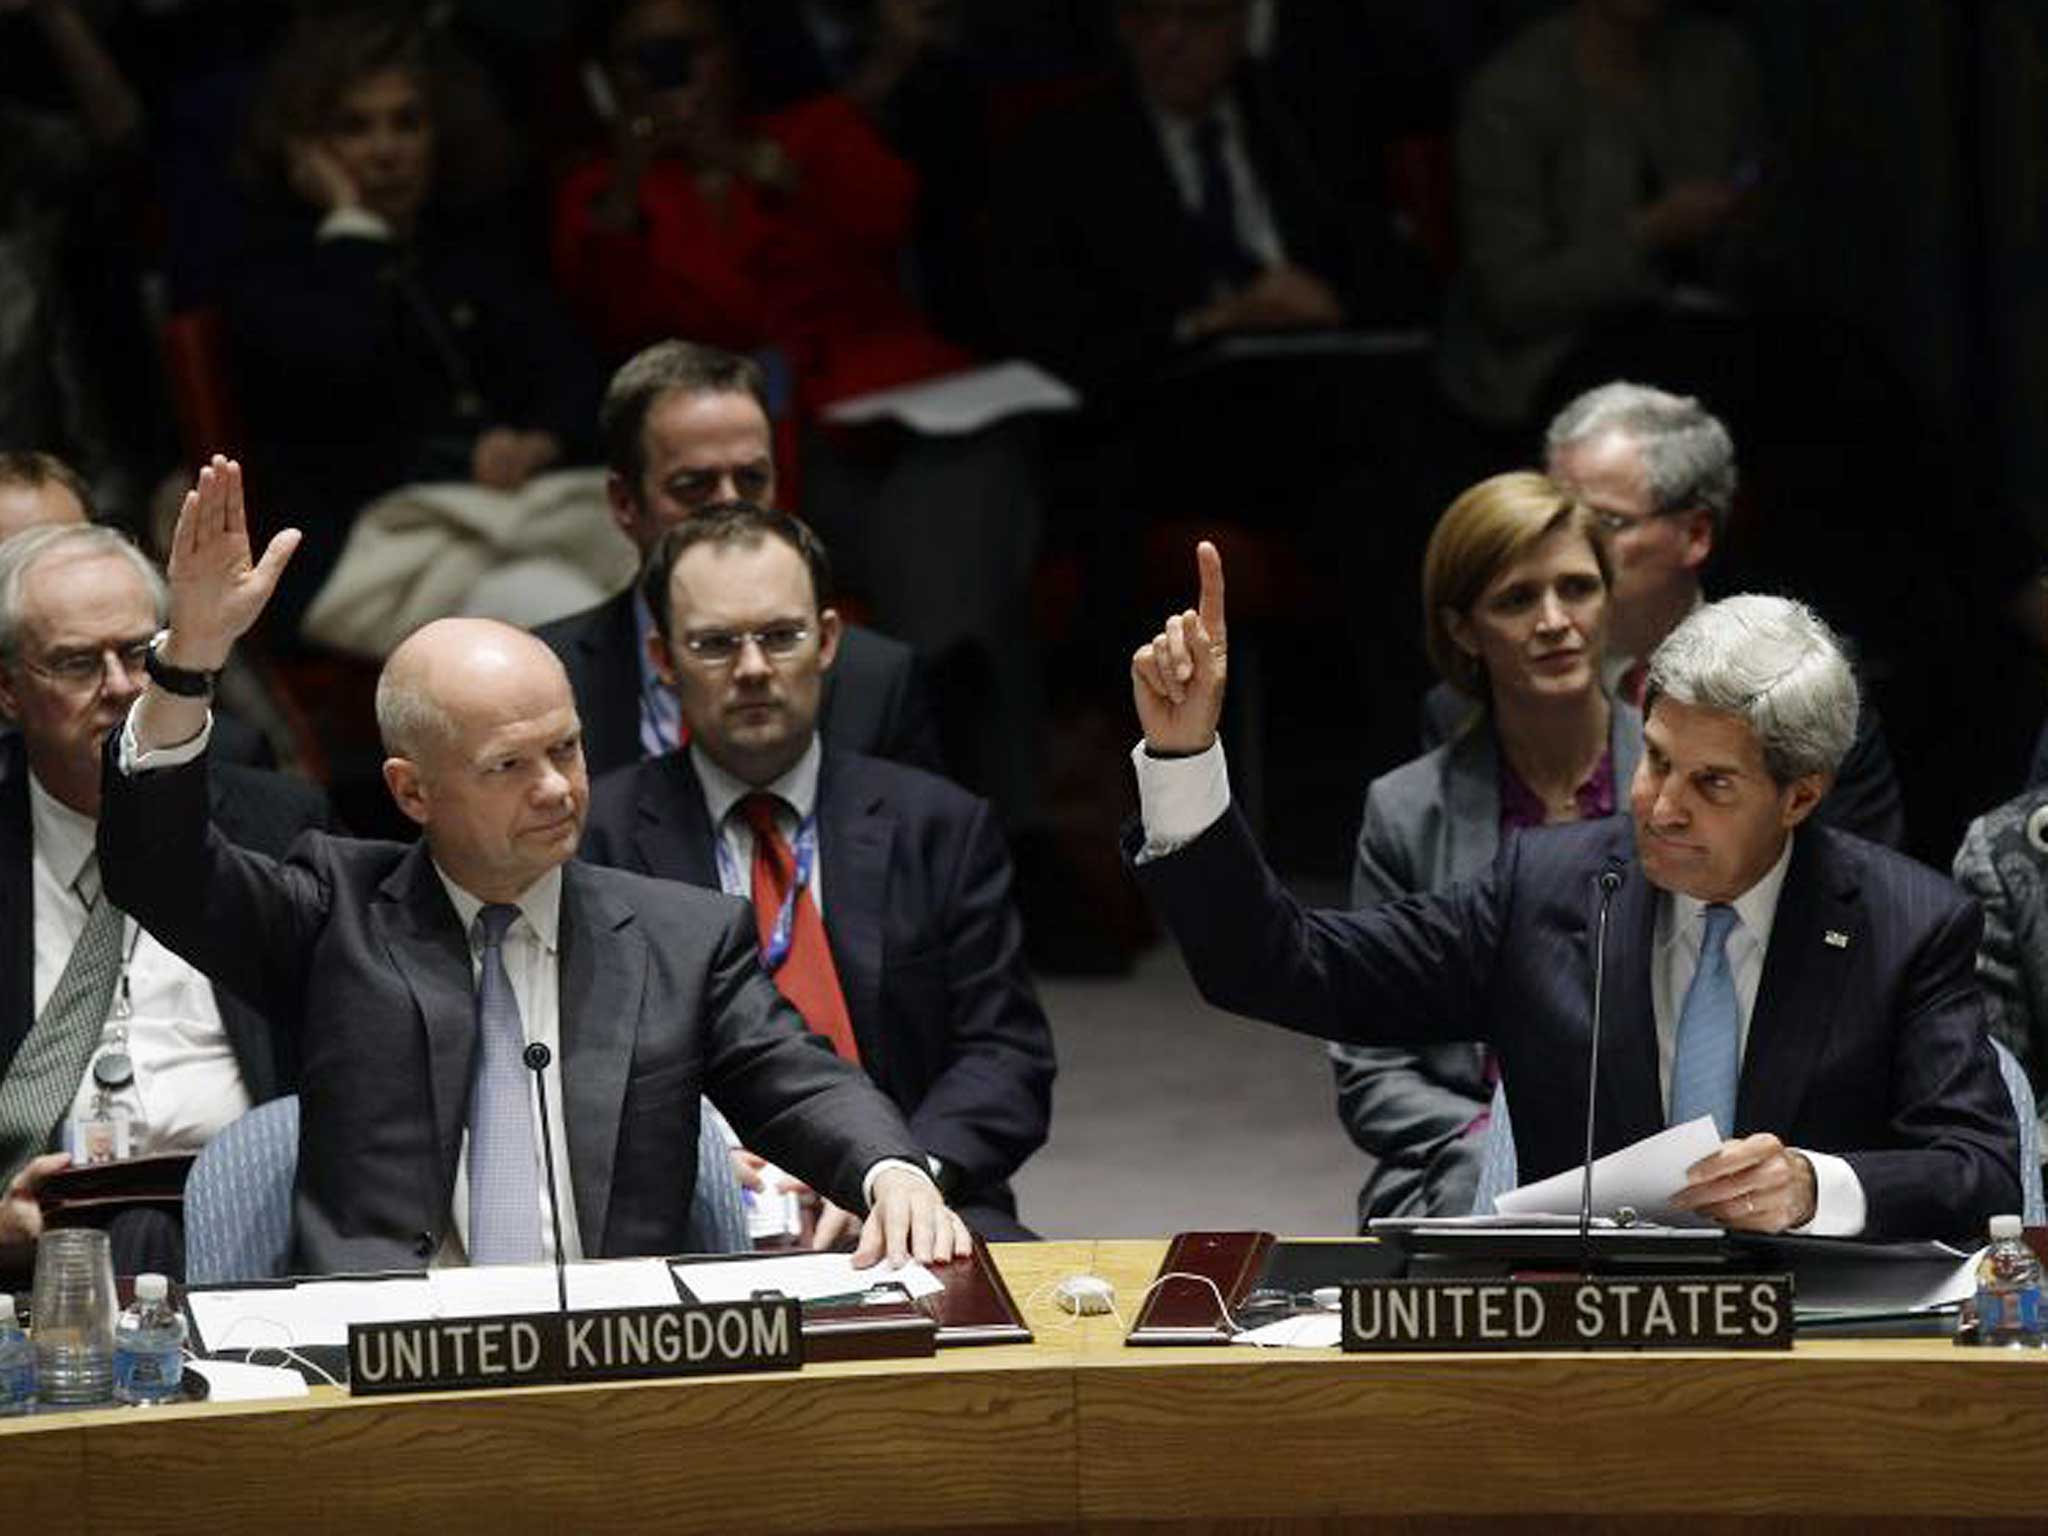 William Hague and John Kerry vote on a resolution regarding Syria's chemical weapons program at a meeting of the United Nations Security Council